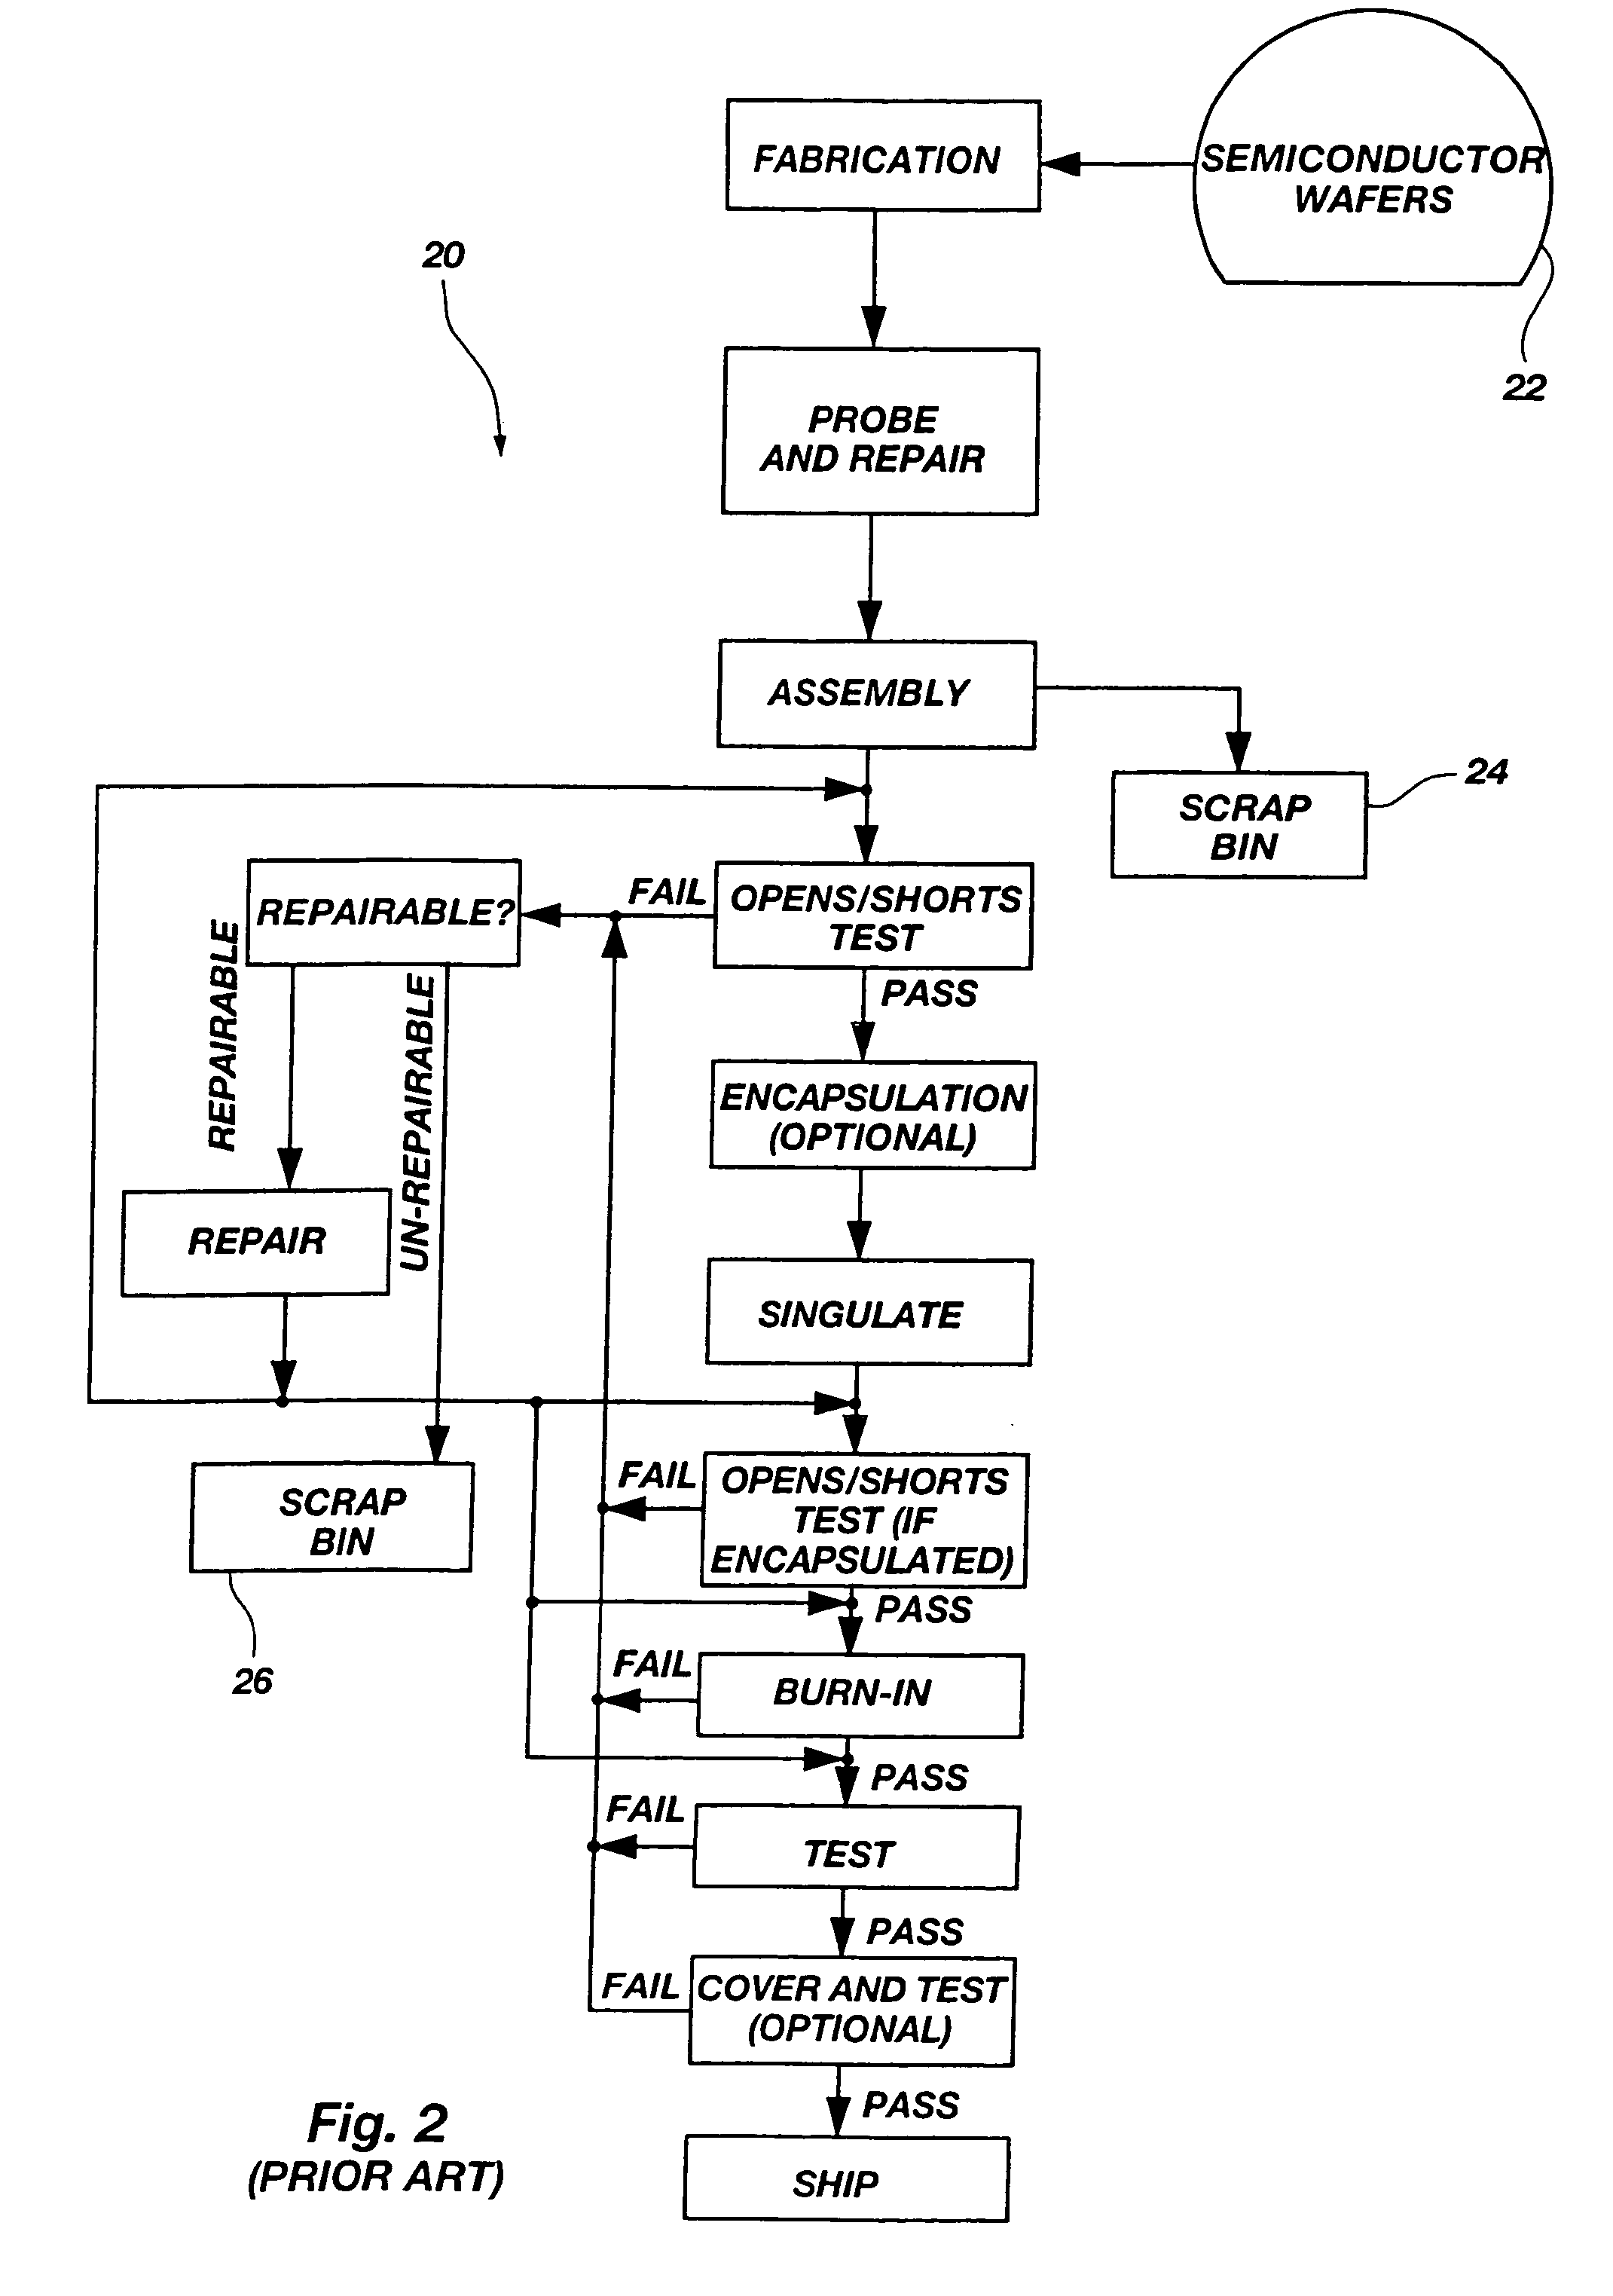 Method for using data regarding manufacturing procedures integrated circuits (ICS) have undergone, such as repairs, to select procedures the ICs will undergo, such as additional repairs